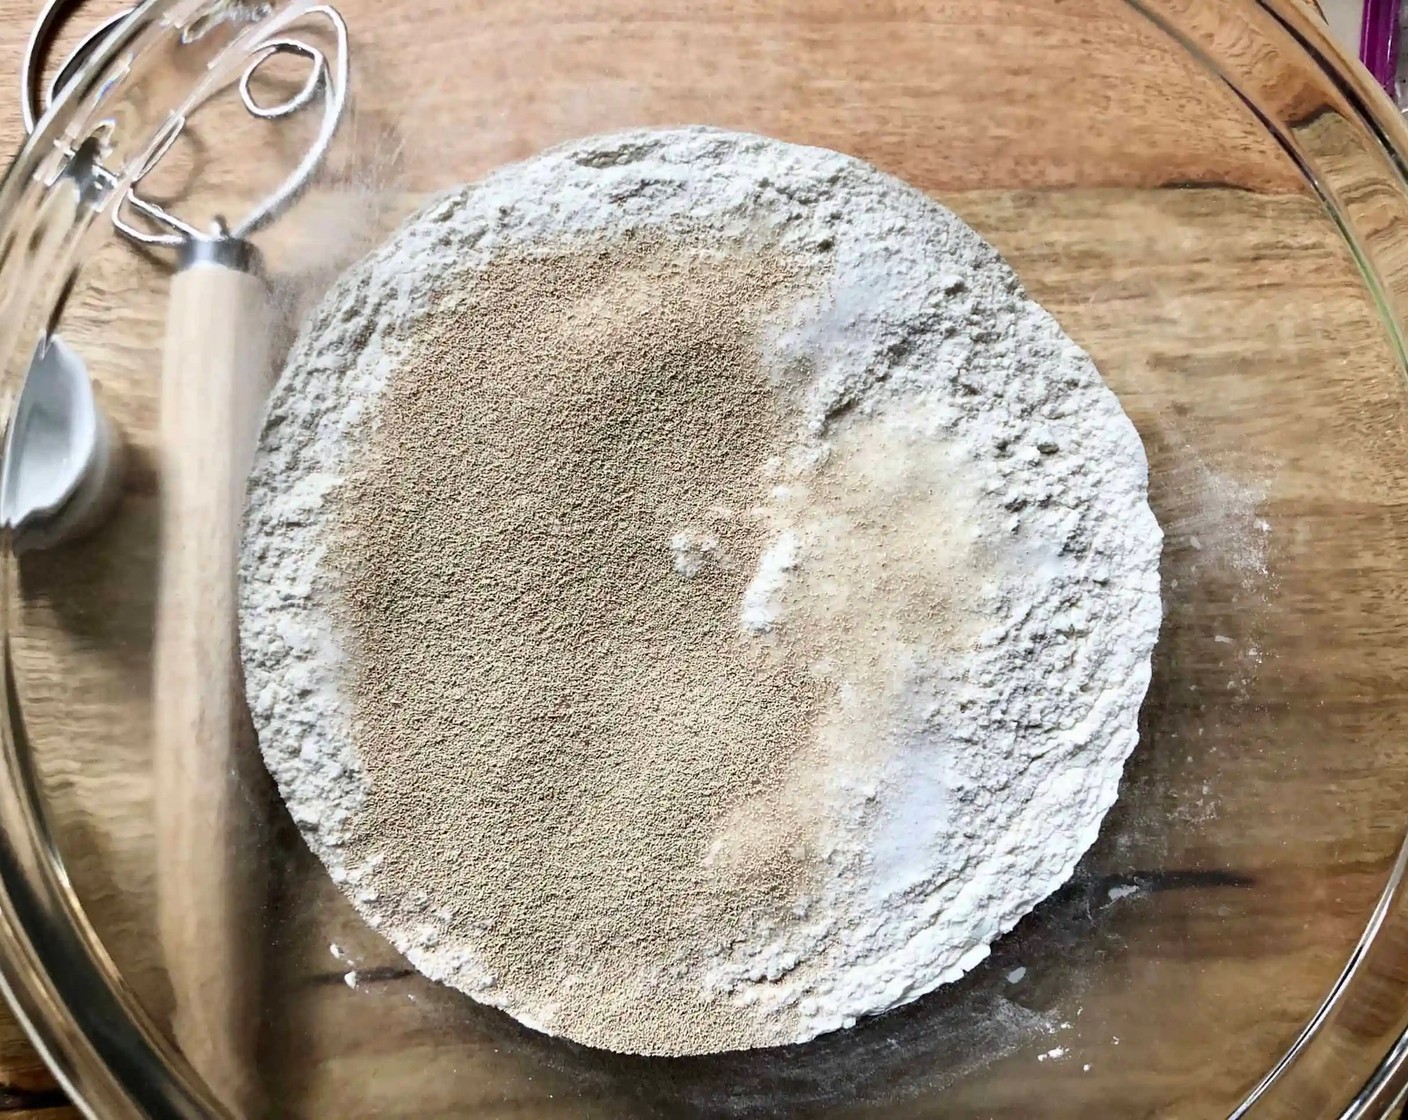 step 1 In a large mixing bowl, whisk together the Unbleached All Purpose Flour (4 cups), Kosher Salt (1/2 Tbsp), Granulated Sugar (1/2 Tbsp), and Instant Dry Yeast (1/2 Tbsp).